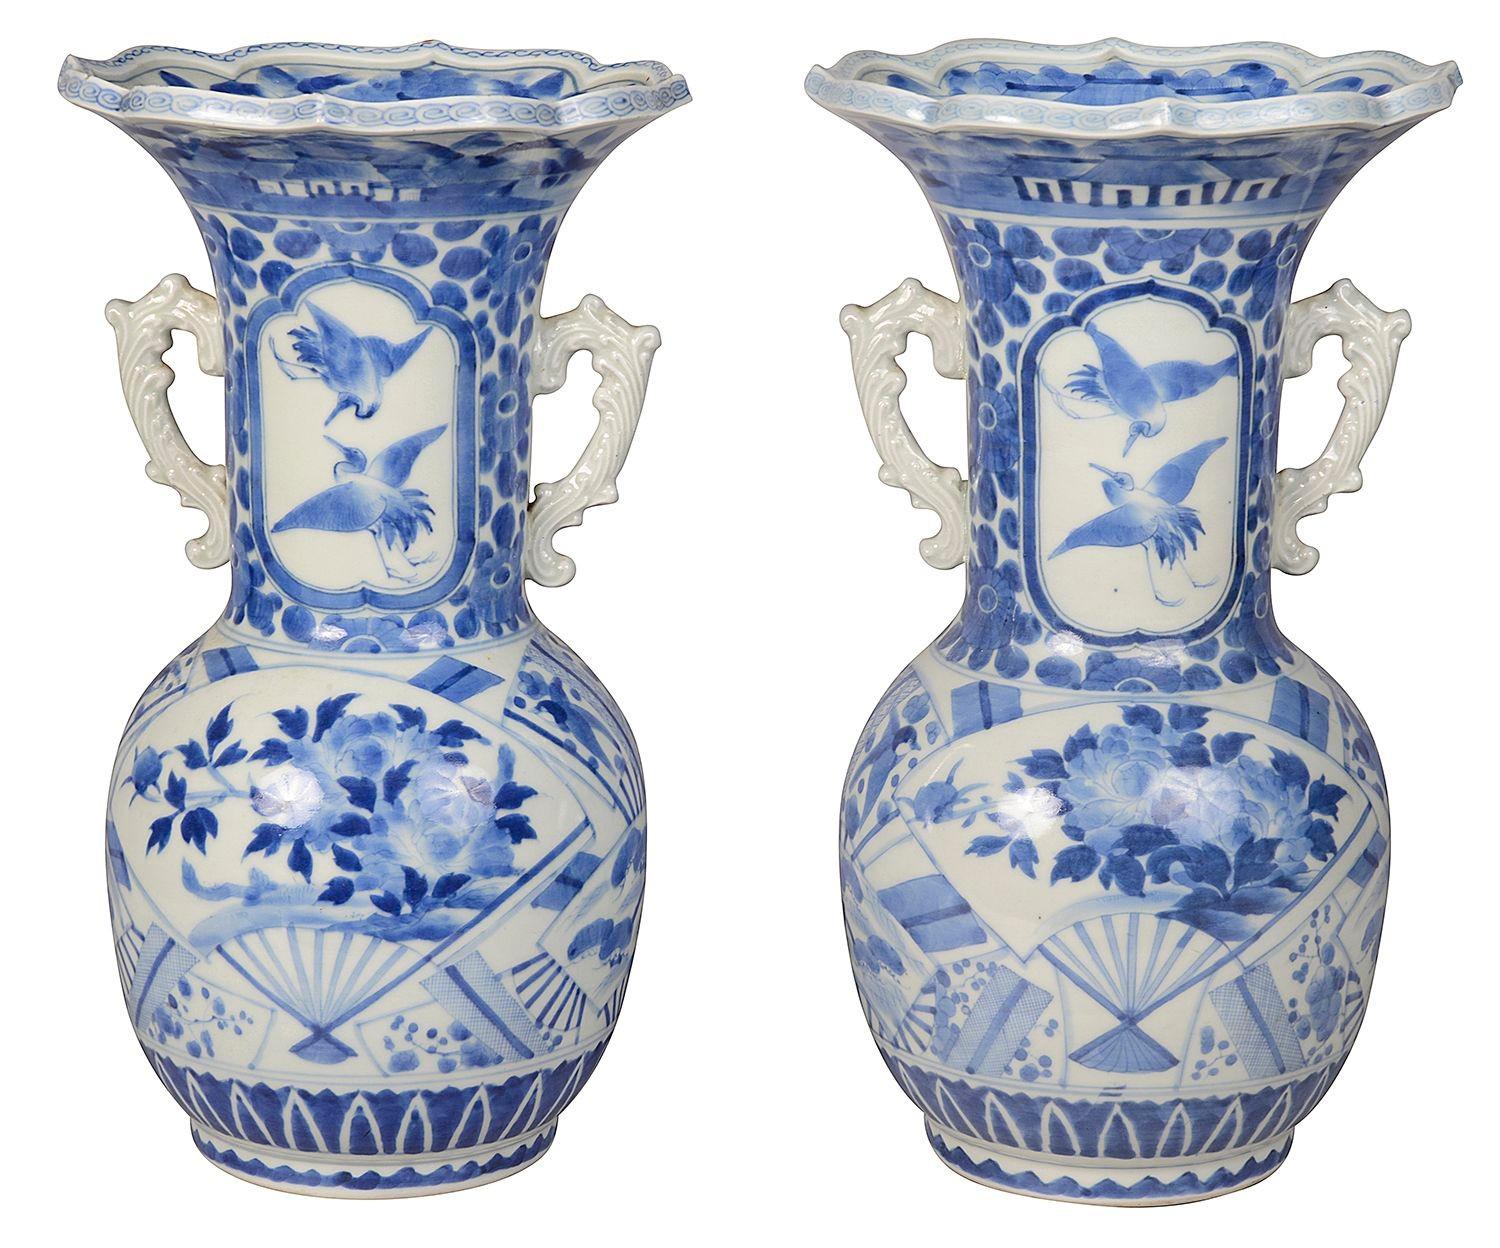 A good quality decorative pair of 19th Century Blue and White Japanese, Meiji period (1868-1912) porcelain vases / lamps, each with flared necks, classical motif decoration to the ground, pairs of handles either side, inset hand painted panels